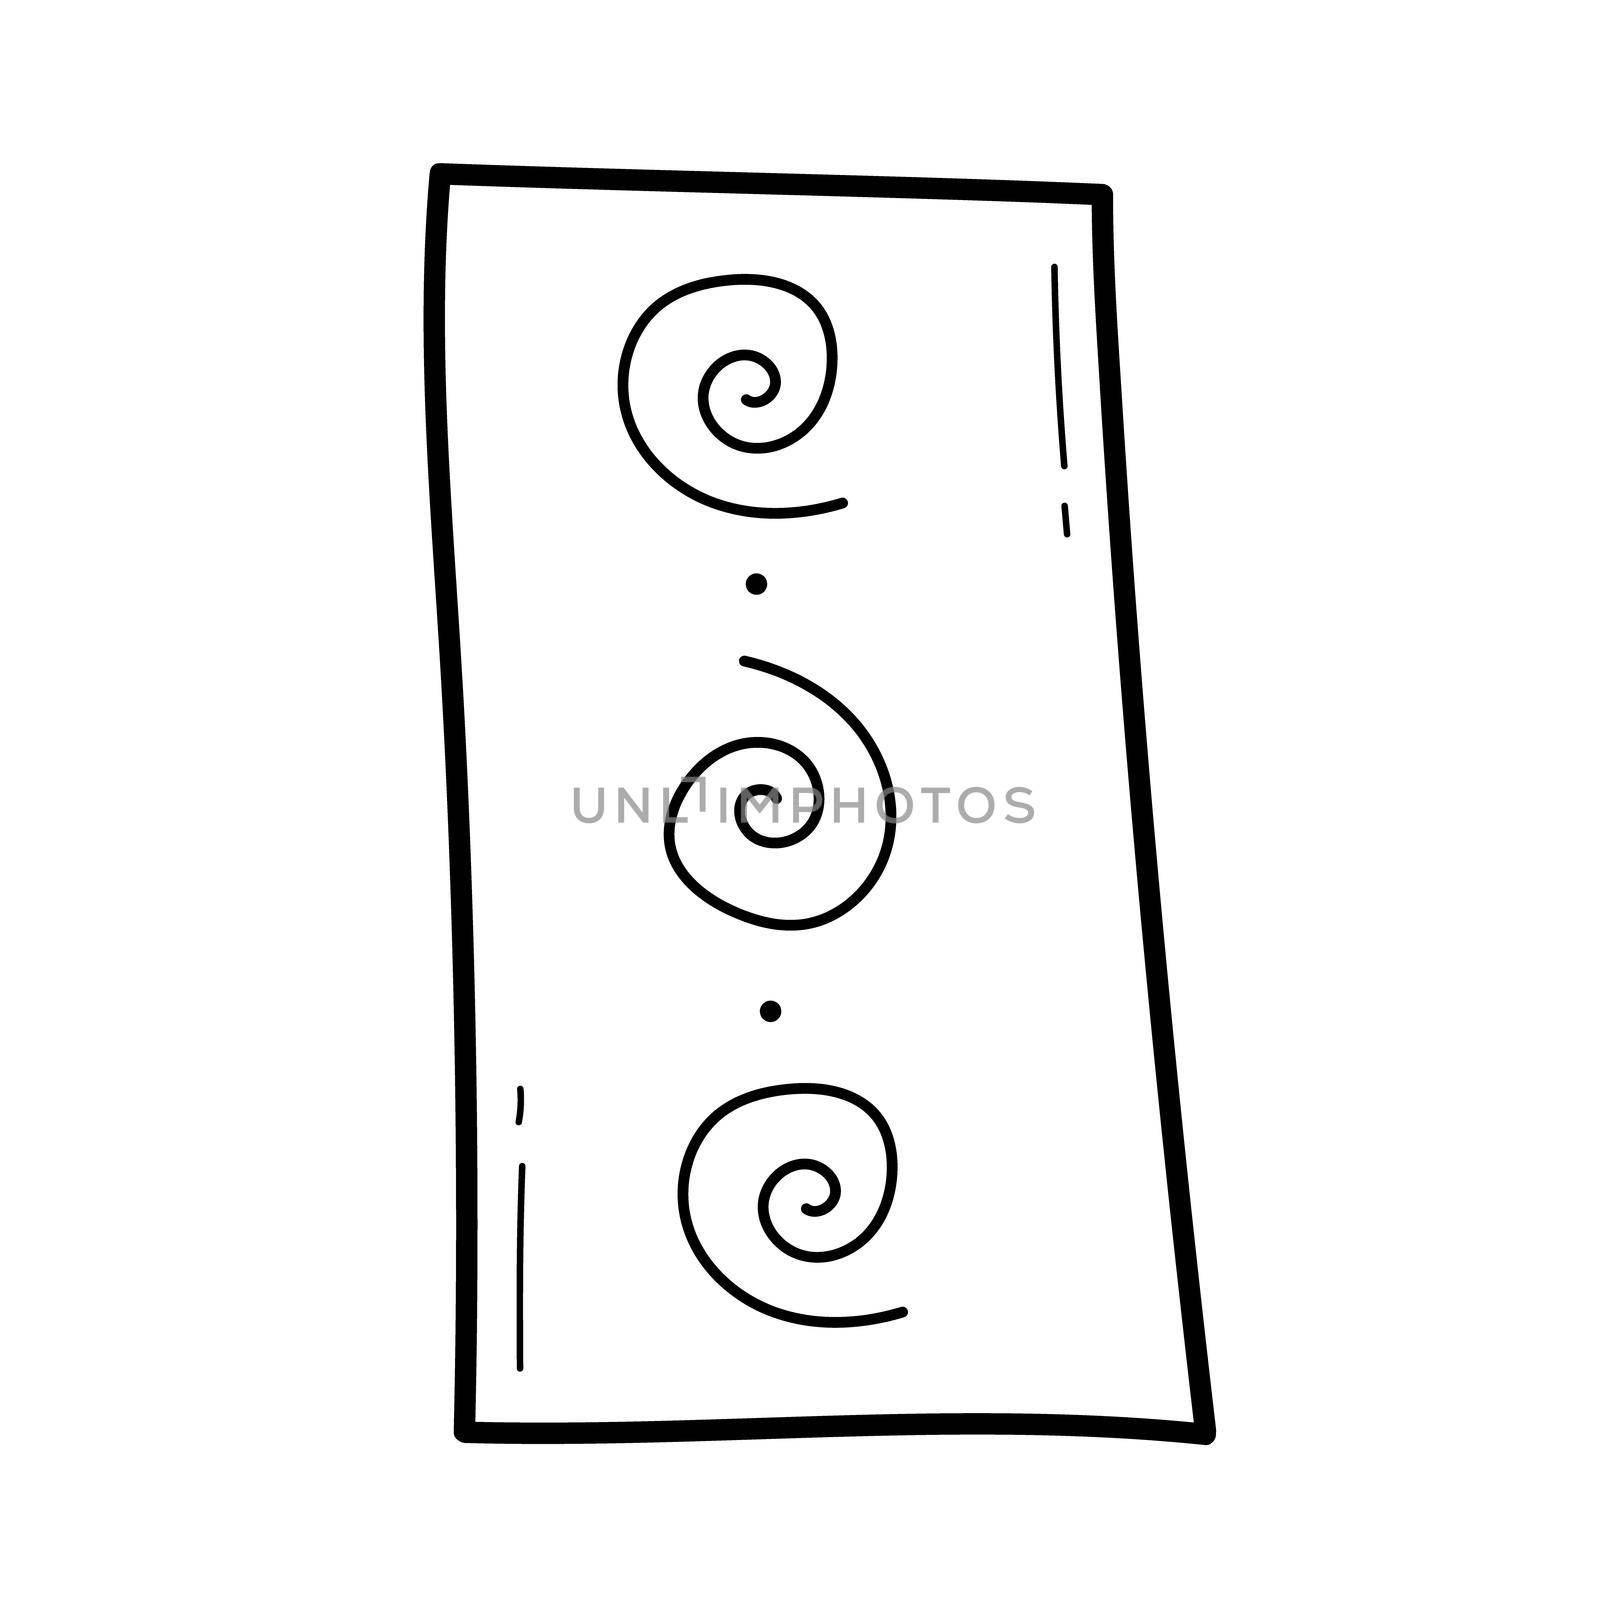 Mat for yoga. Simple vector icon in doodle style isolated on white background by natali_brill